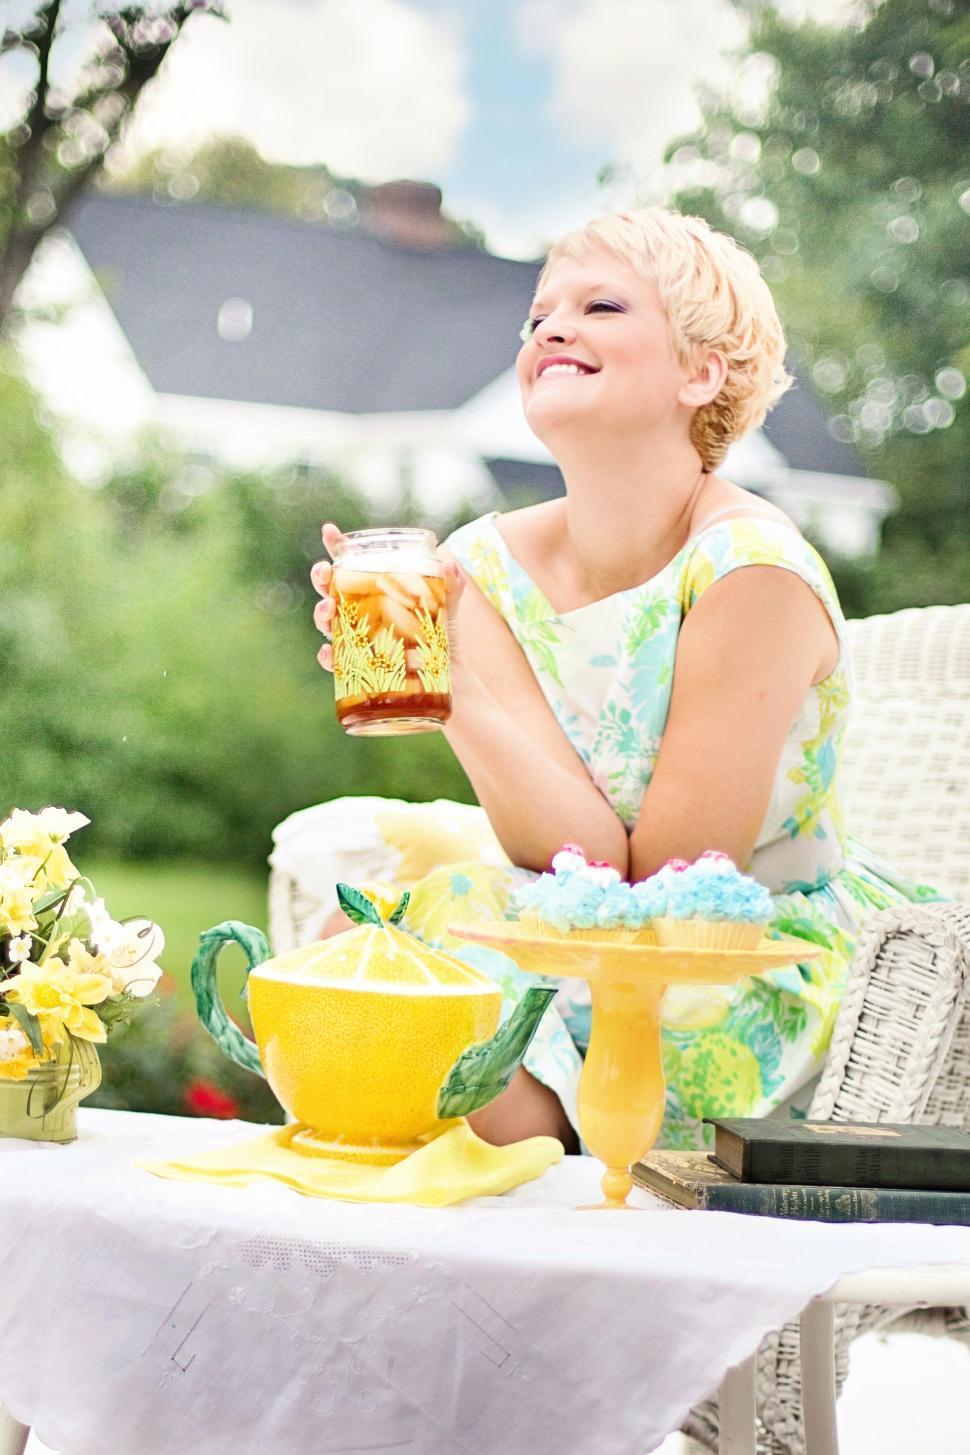 Free Image of Stylish Blonde Woman Laughing and Holding Glass Jar During Breakfast in the garden 